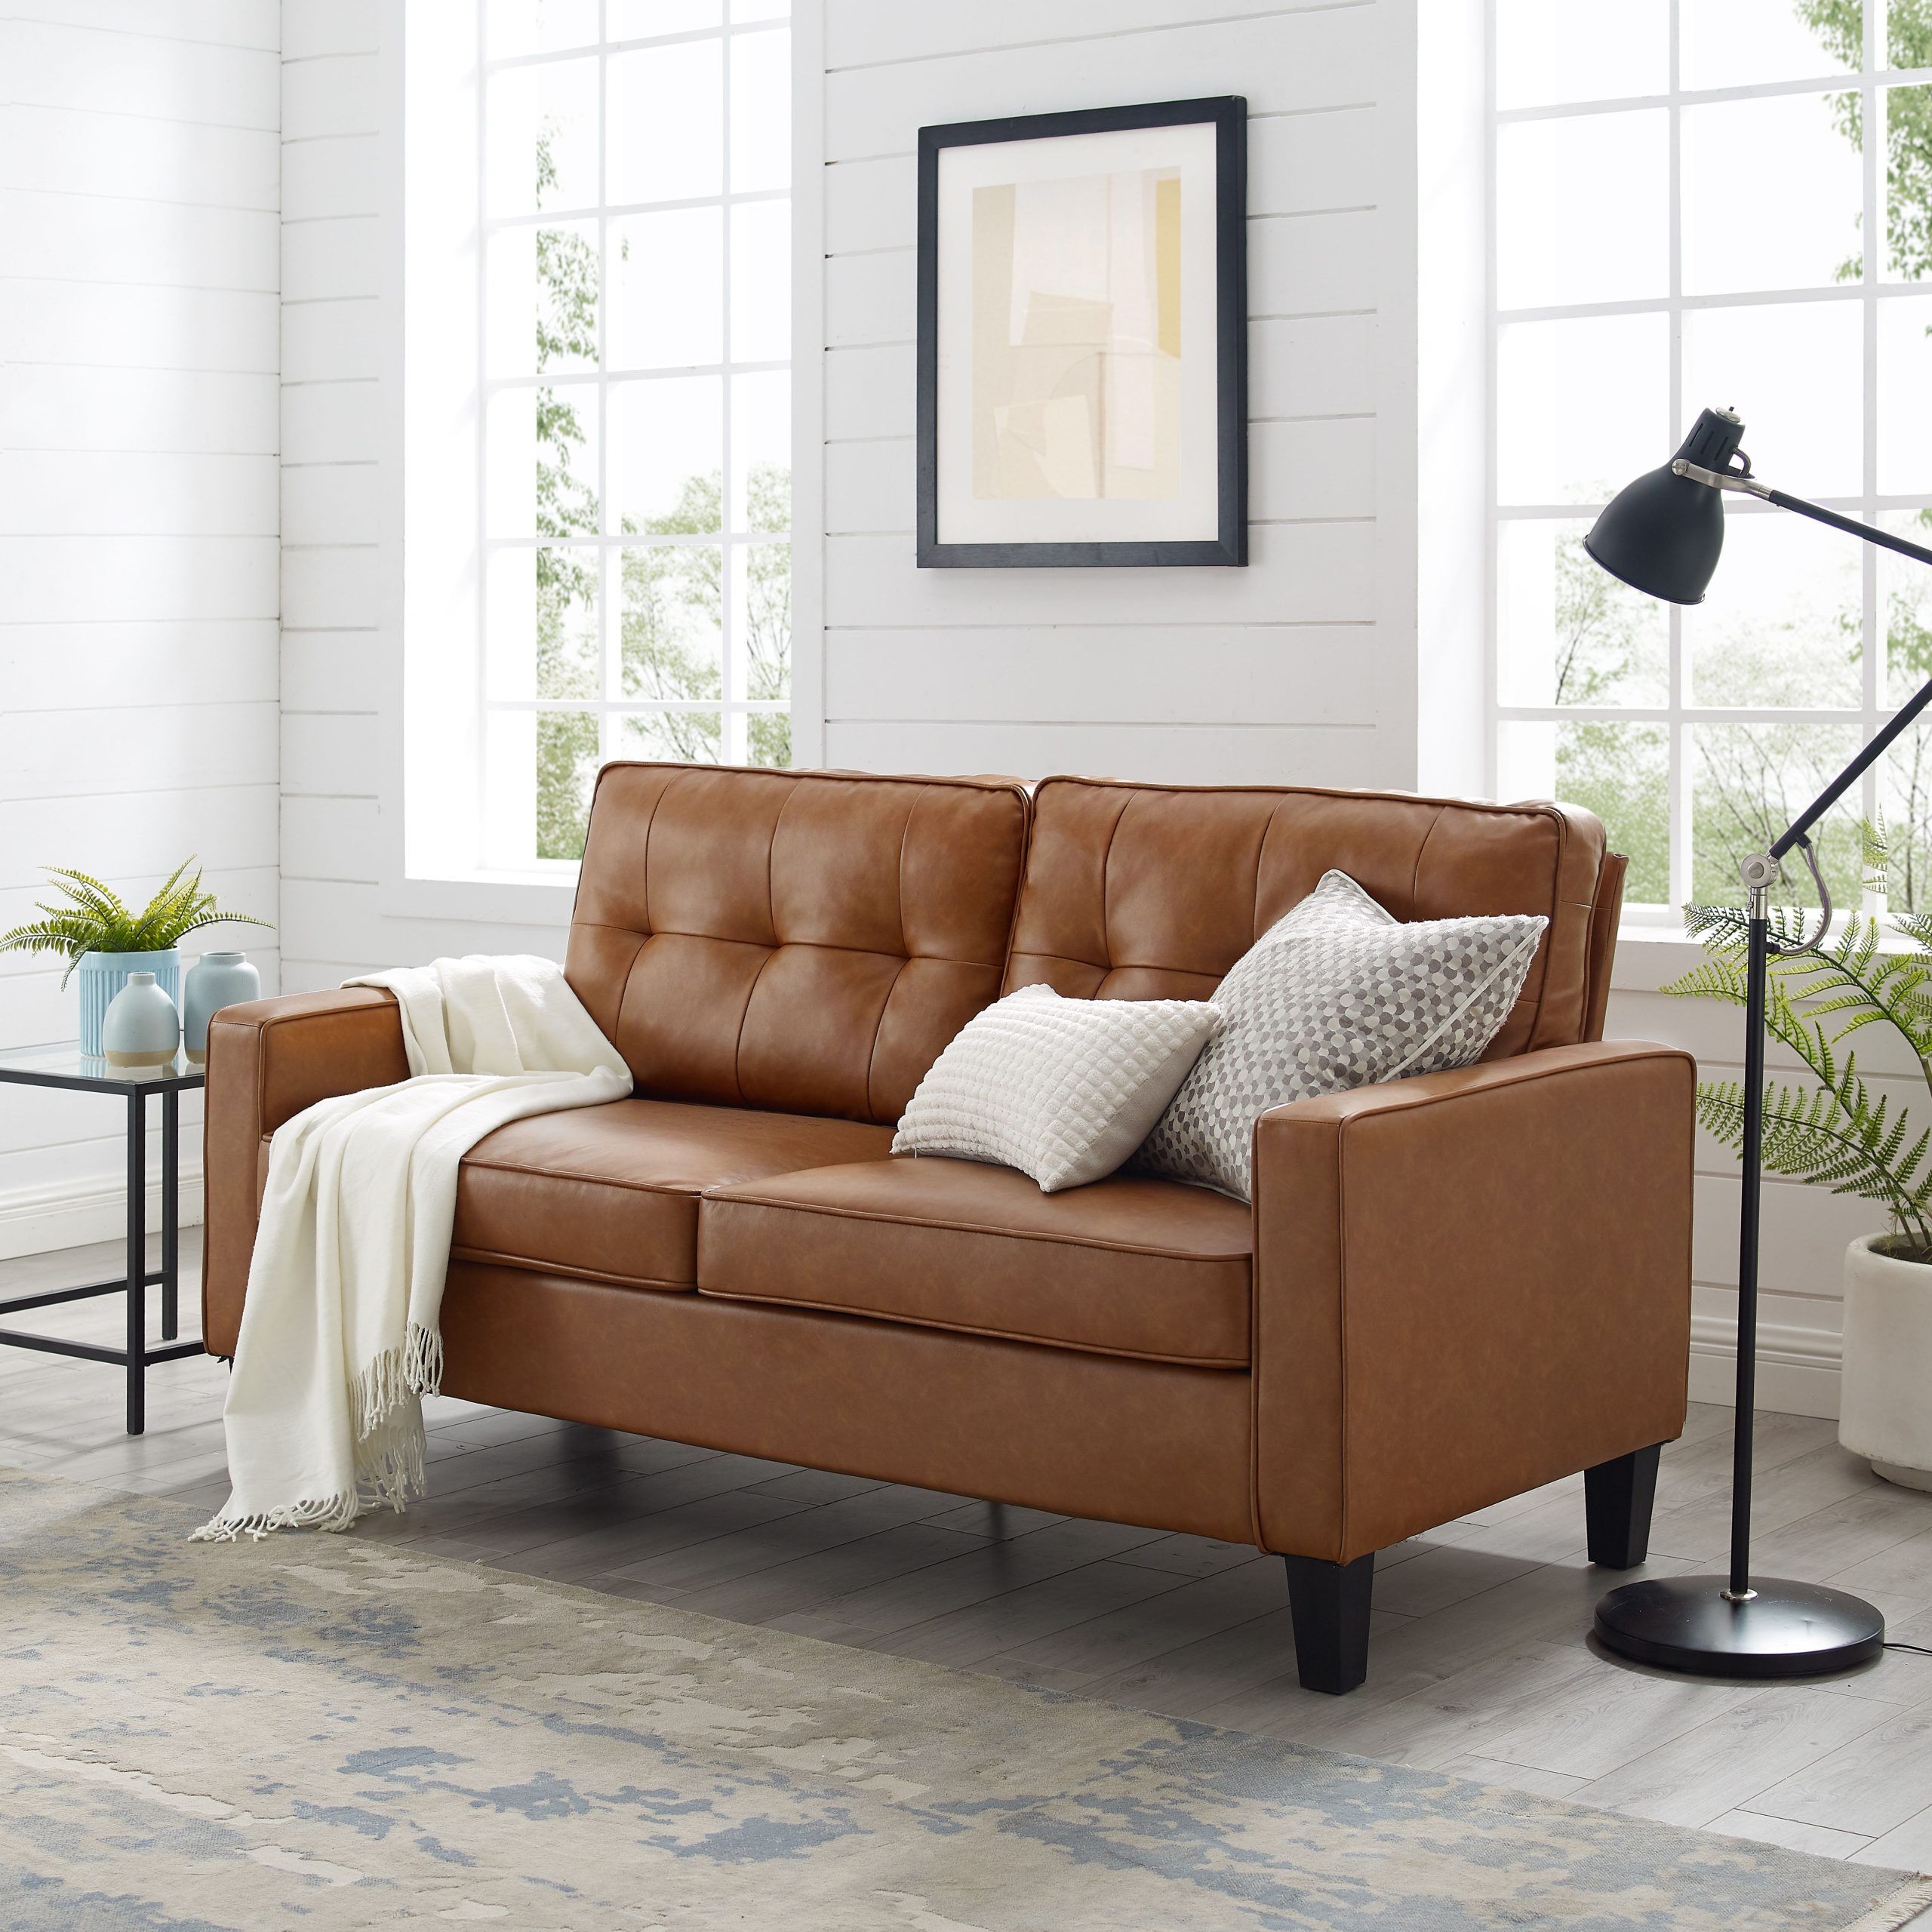 Faux Leather Sofas In Chocolate Brown Inside Most Up To Date Mainstays Faux Leather Apartment Sofa Brown – Walmart (View 6 of 15)